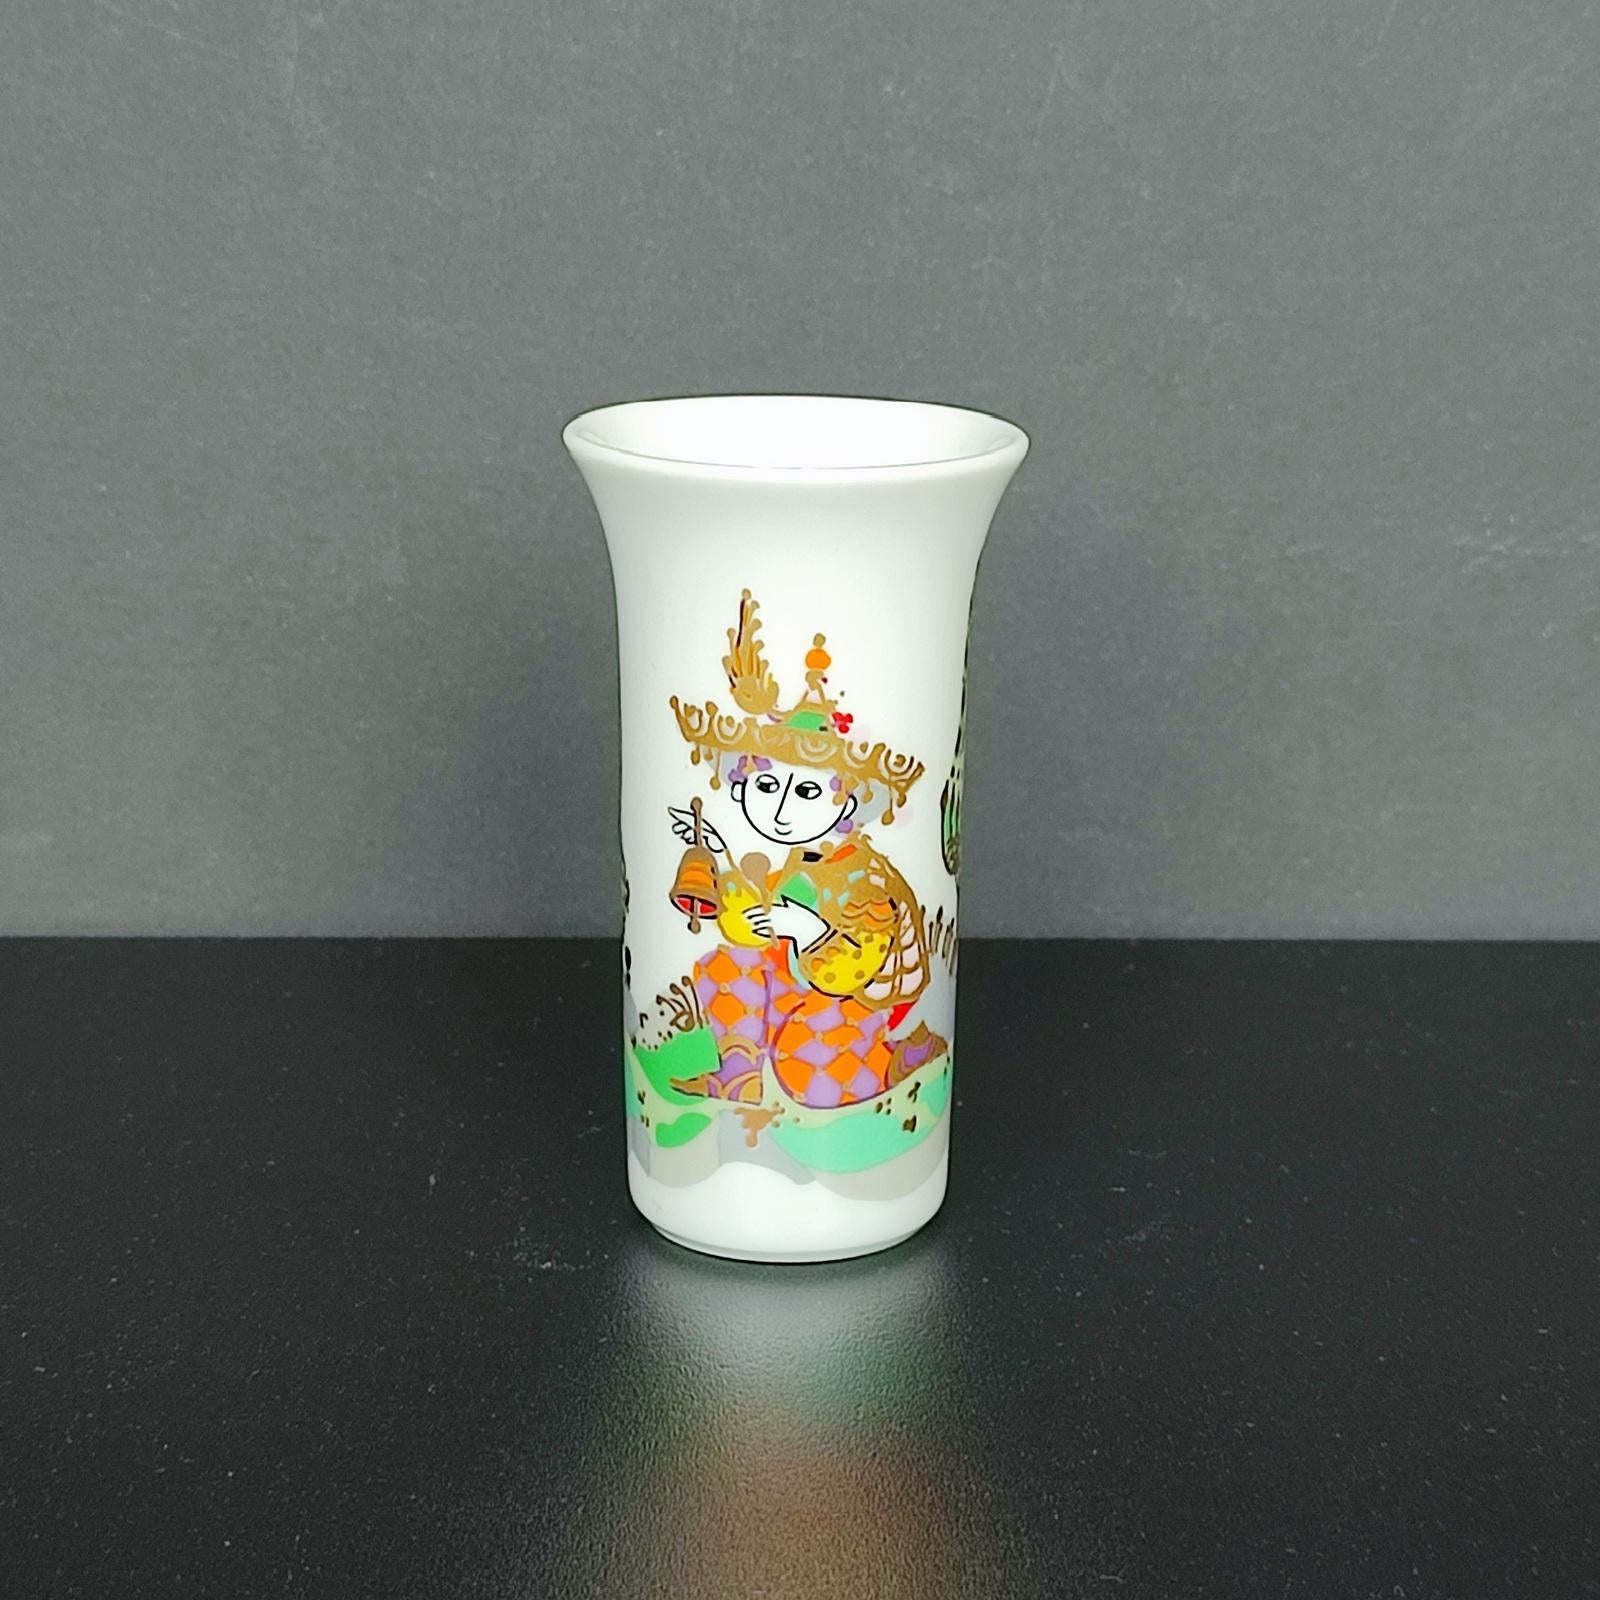 Rosenthal Studio-linie 'Arundo' vase by Bjorn Wiinblad, Germany 1986 - German porcelain.
Signed Björn Winblad on the wall, makers mark on the bottom.
A cute little vase of exceptional quality!
Height 8.8 cm